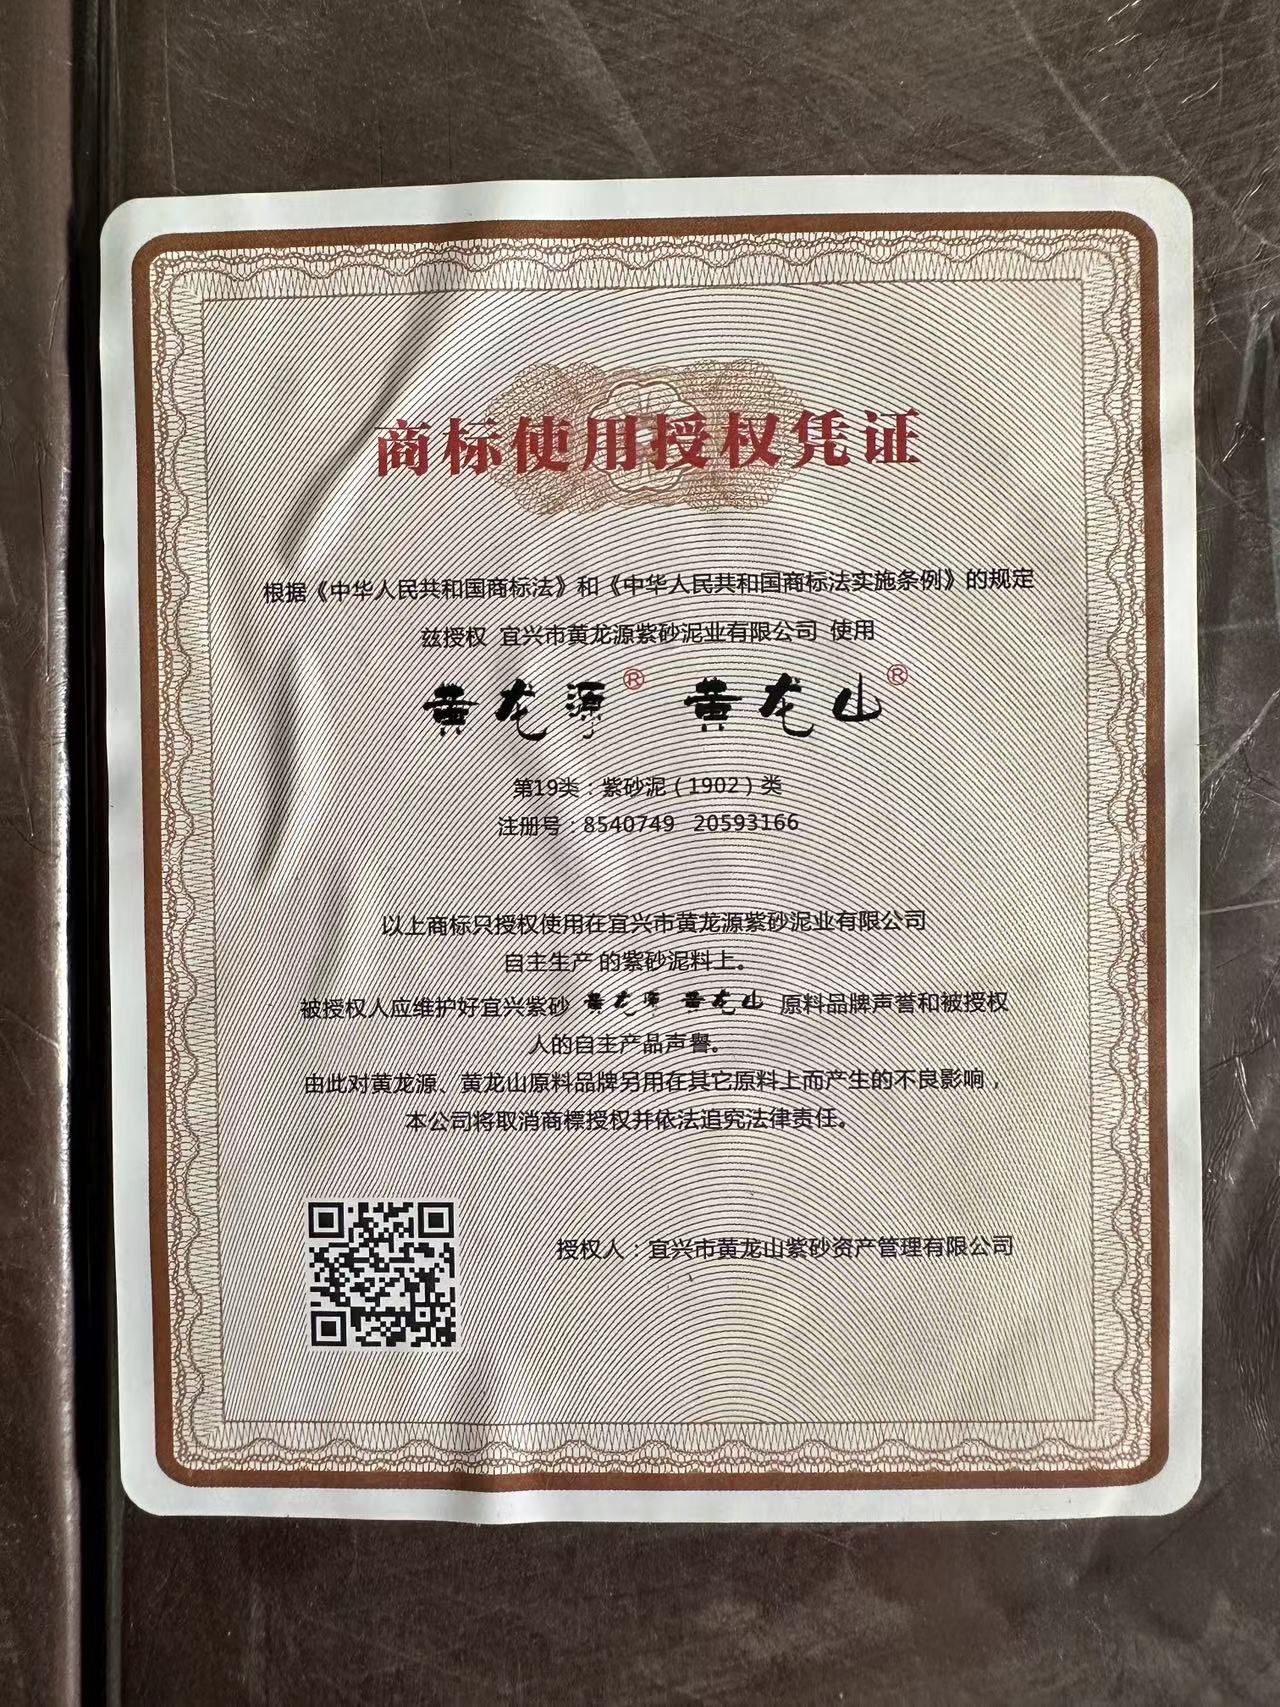 For Mr T.N.: Ming Yuan Yin Bao 鸣远印包, made of the Nationally-Authenticated True 4th Quarry DiCaoQing 国家验证四号井底槽青, Huang Long Yuan certification, crafted by our L4 Assoc Master Yang Quan Sheng 杨全胜。